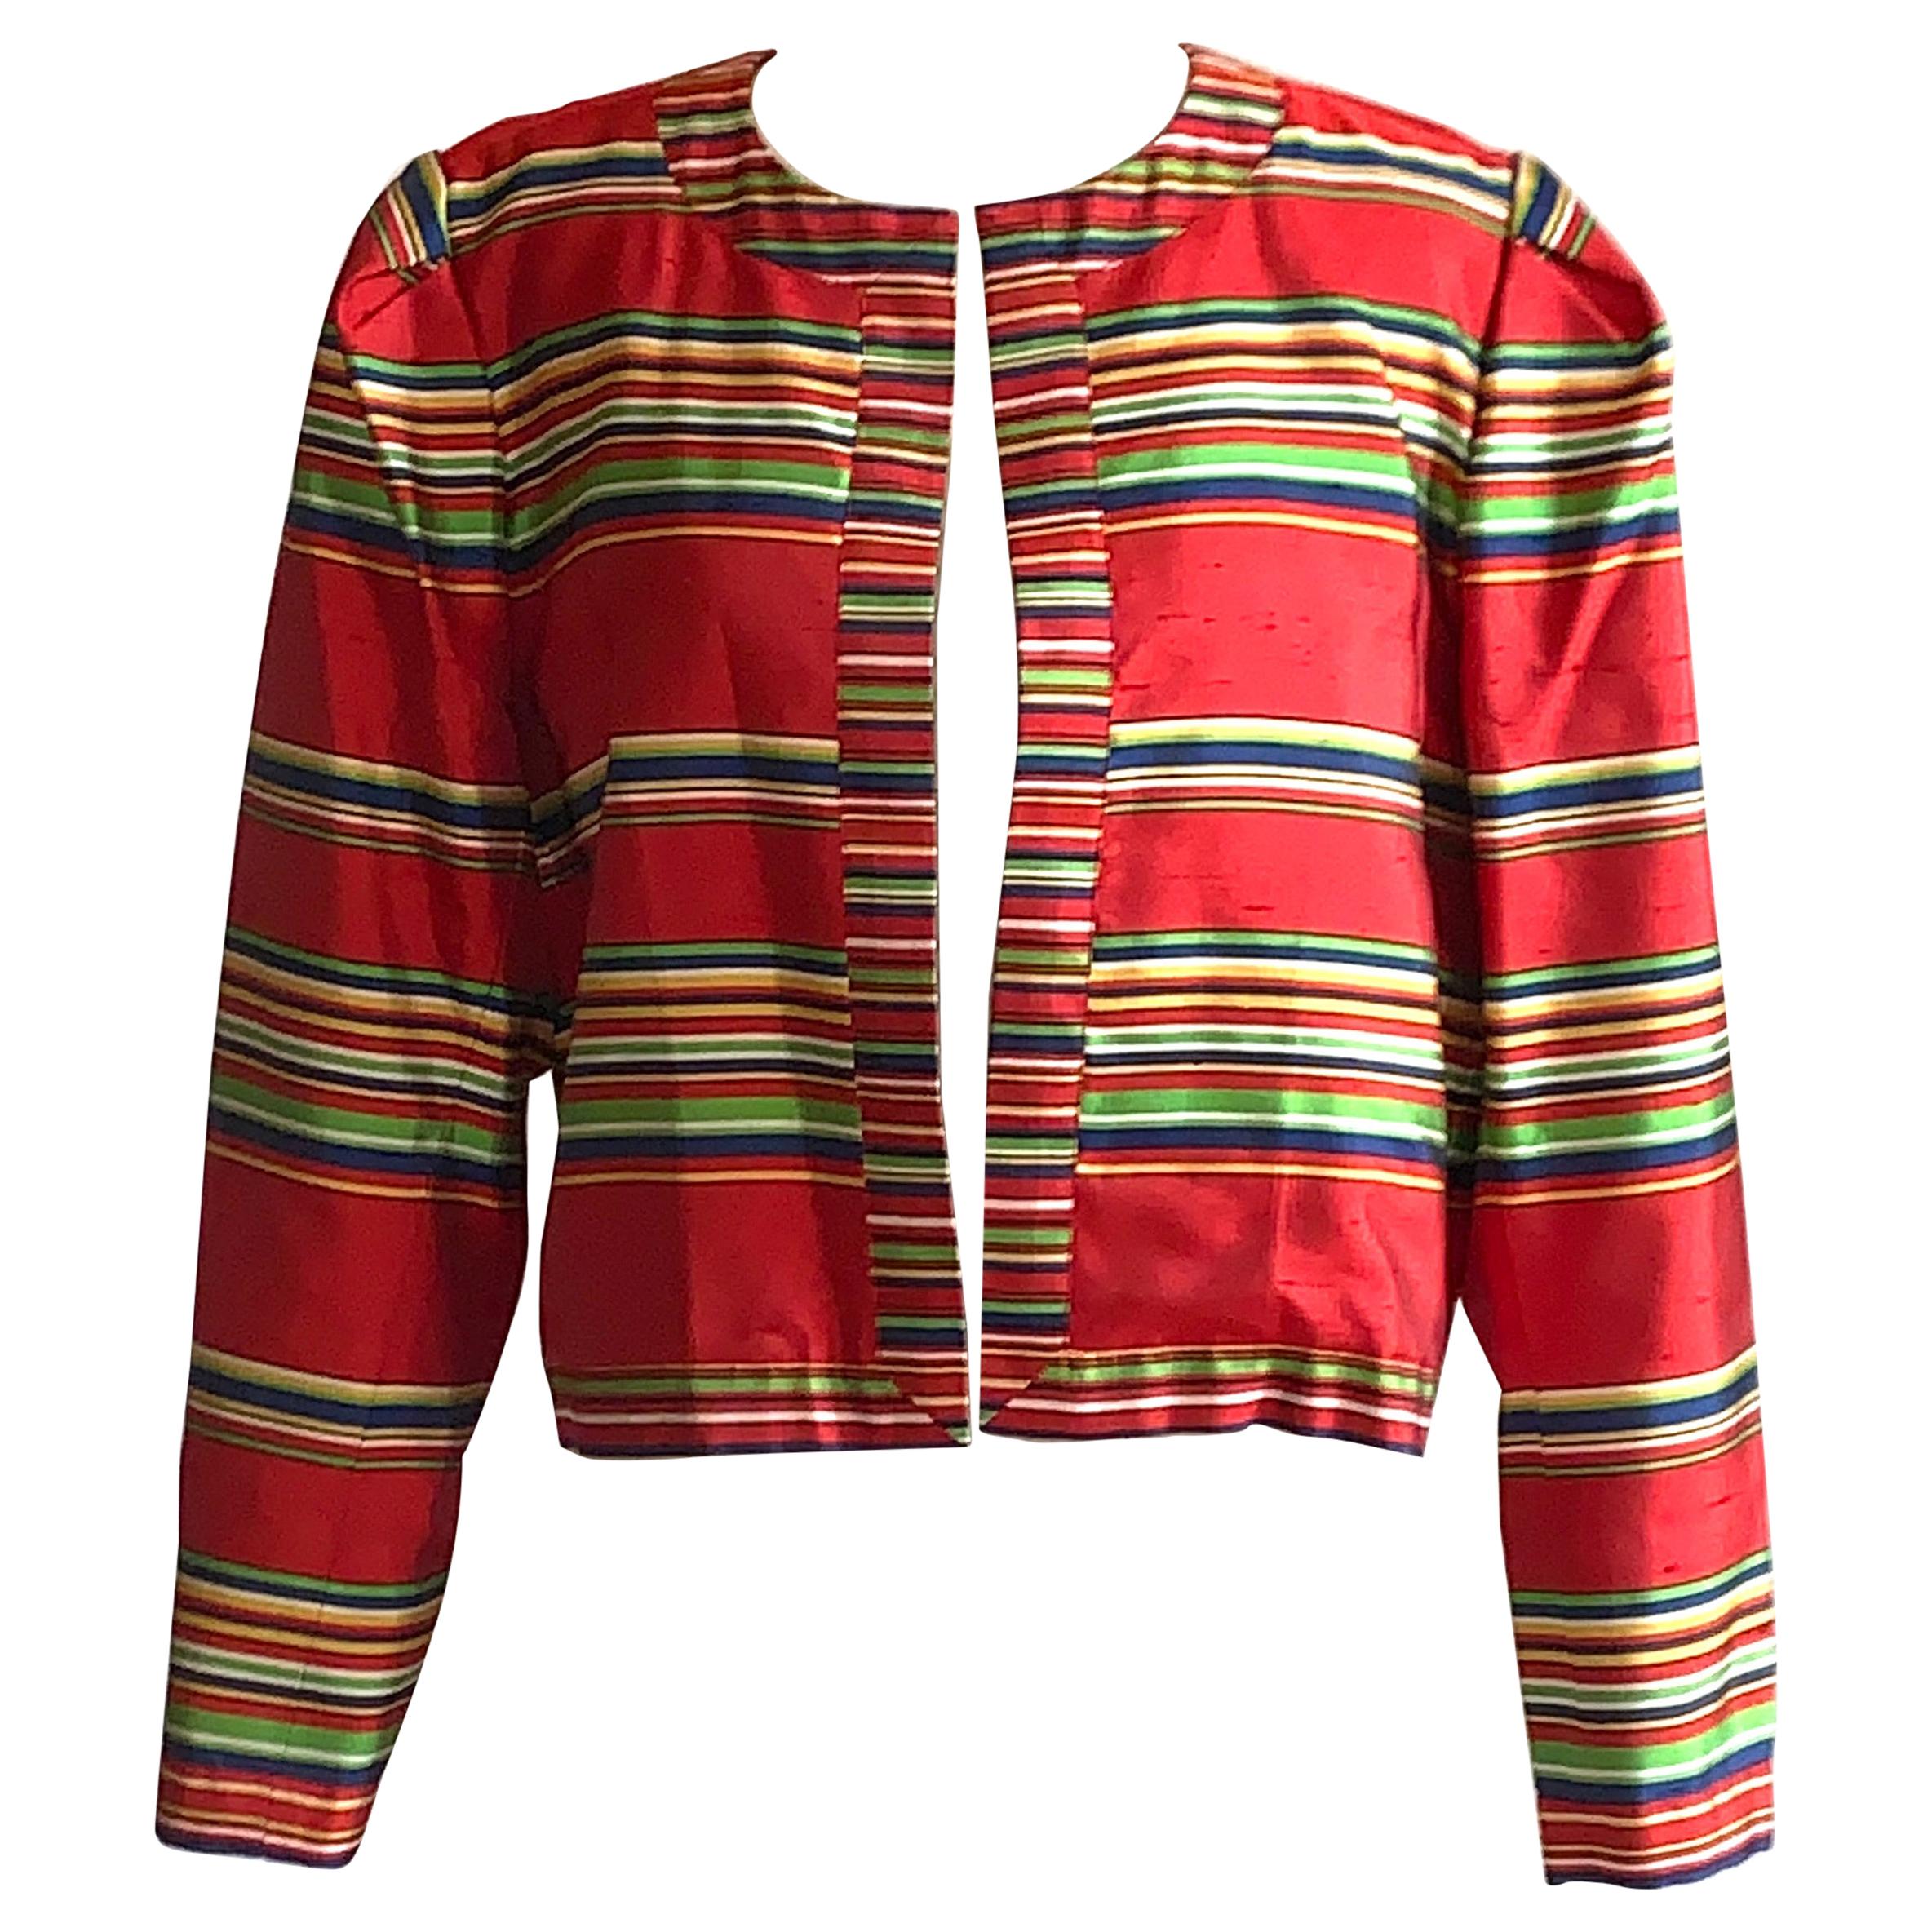 Yves Saint Laurent 1990s Silk Jacket in Red, Green, Blue and Yellow Stripe